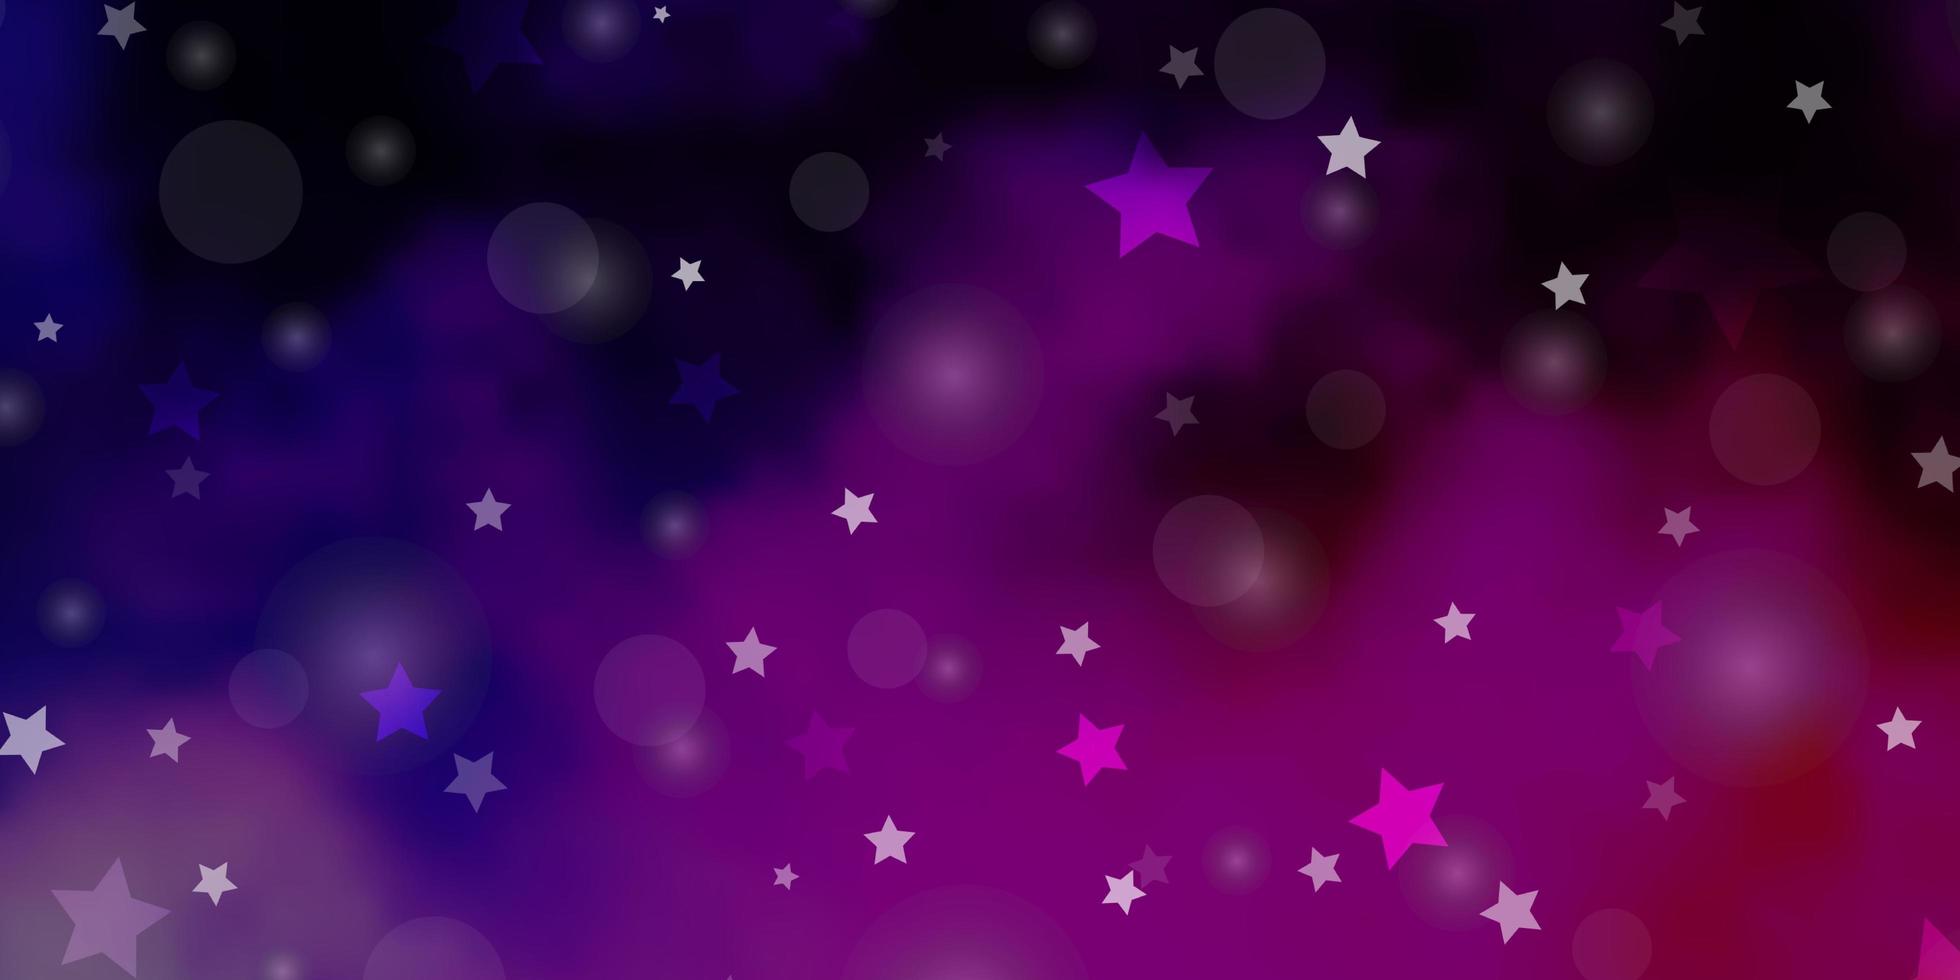 Dark Purple Pink vector layout with circles stars Abstract design in gradient style with bubbles stars Design for wallpaper fabric makers